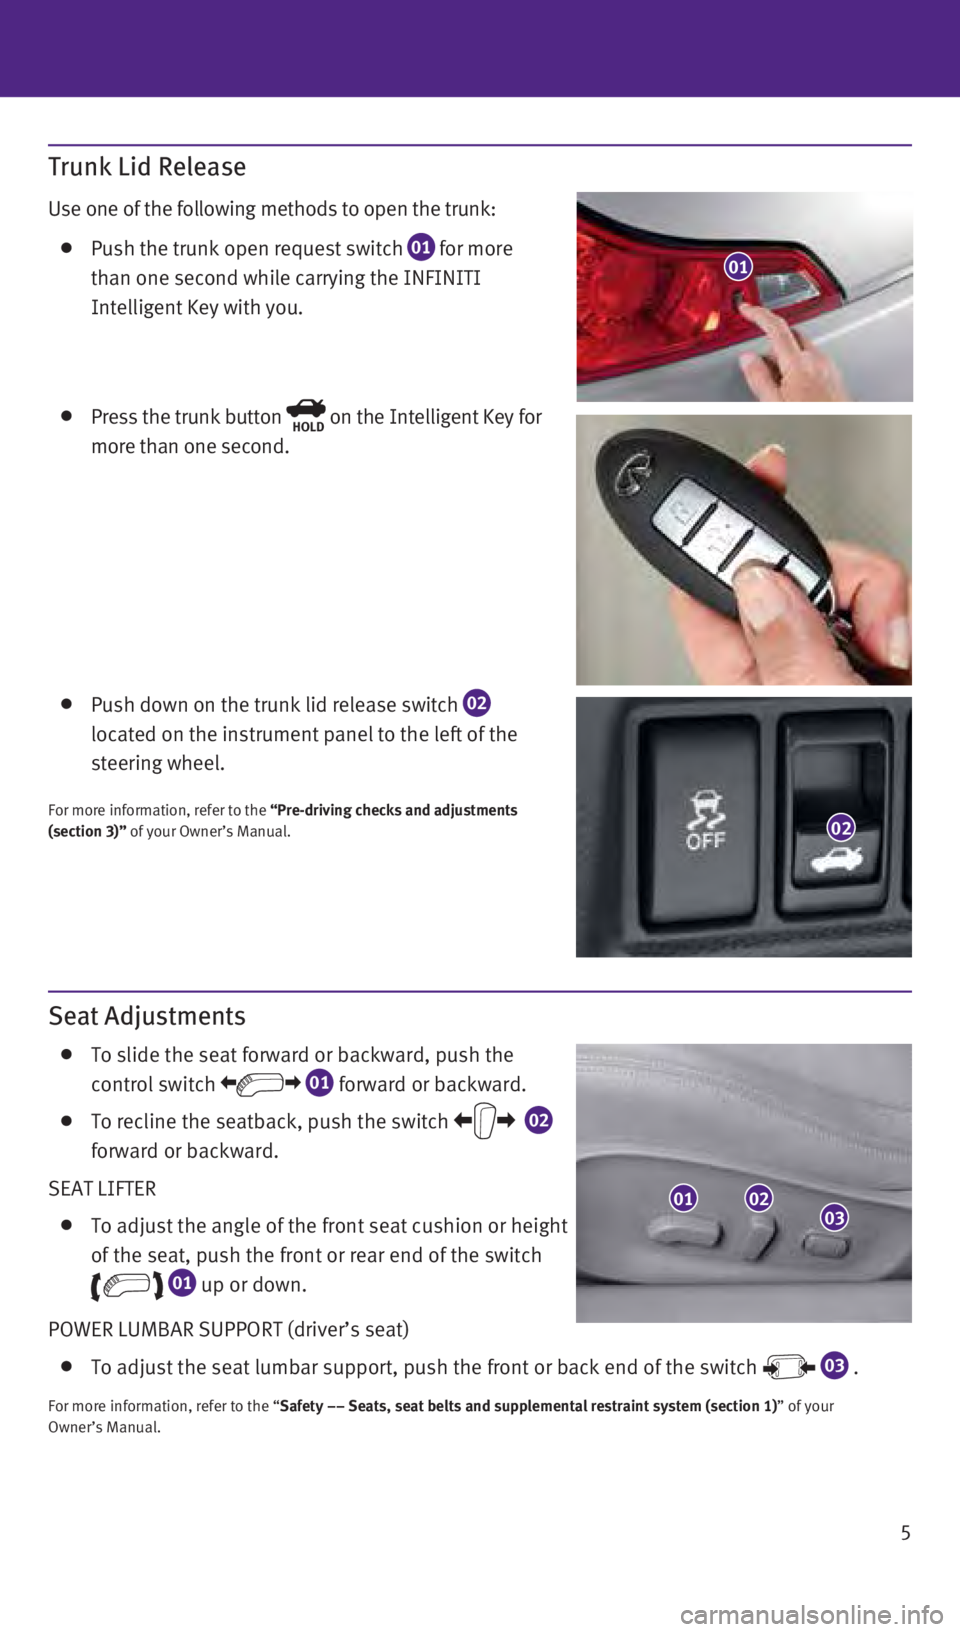 INFINITI Q60 COUPE 2014  Quick Reference Guide Seat Adjustments
   To slide the seat forward or backward, push the 
control switch  
 01 forward or backward.
   To recline the seatback, push the switch
   02  
 
forward or backward.
SEAT LIFTER
  